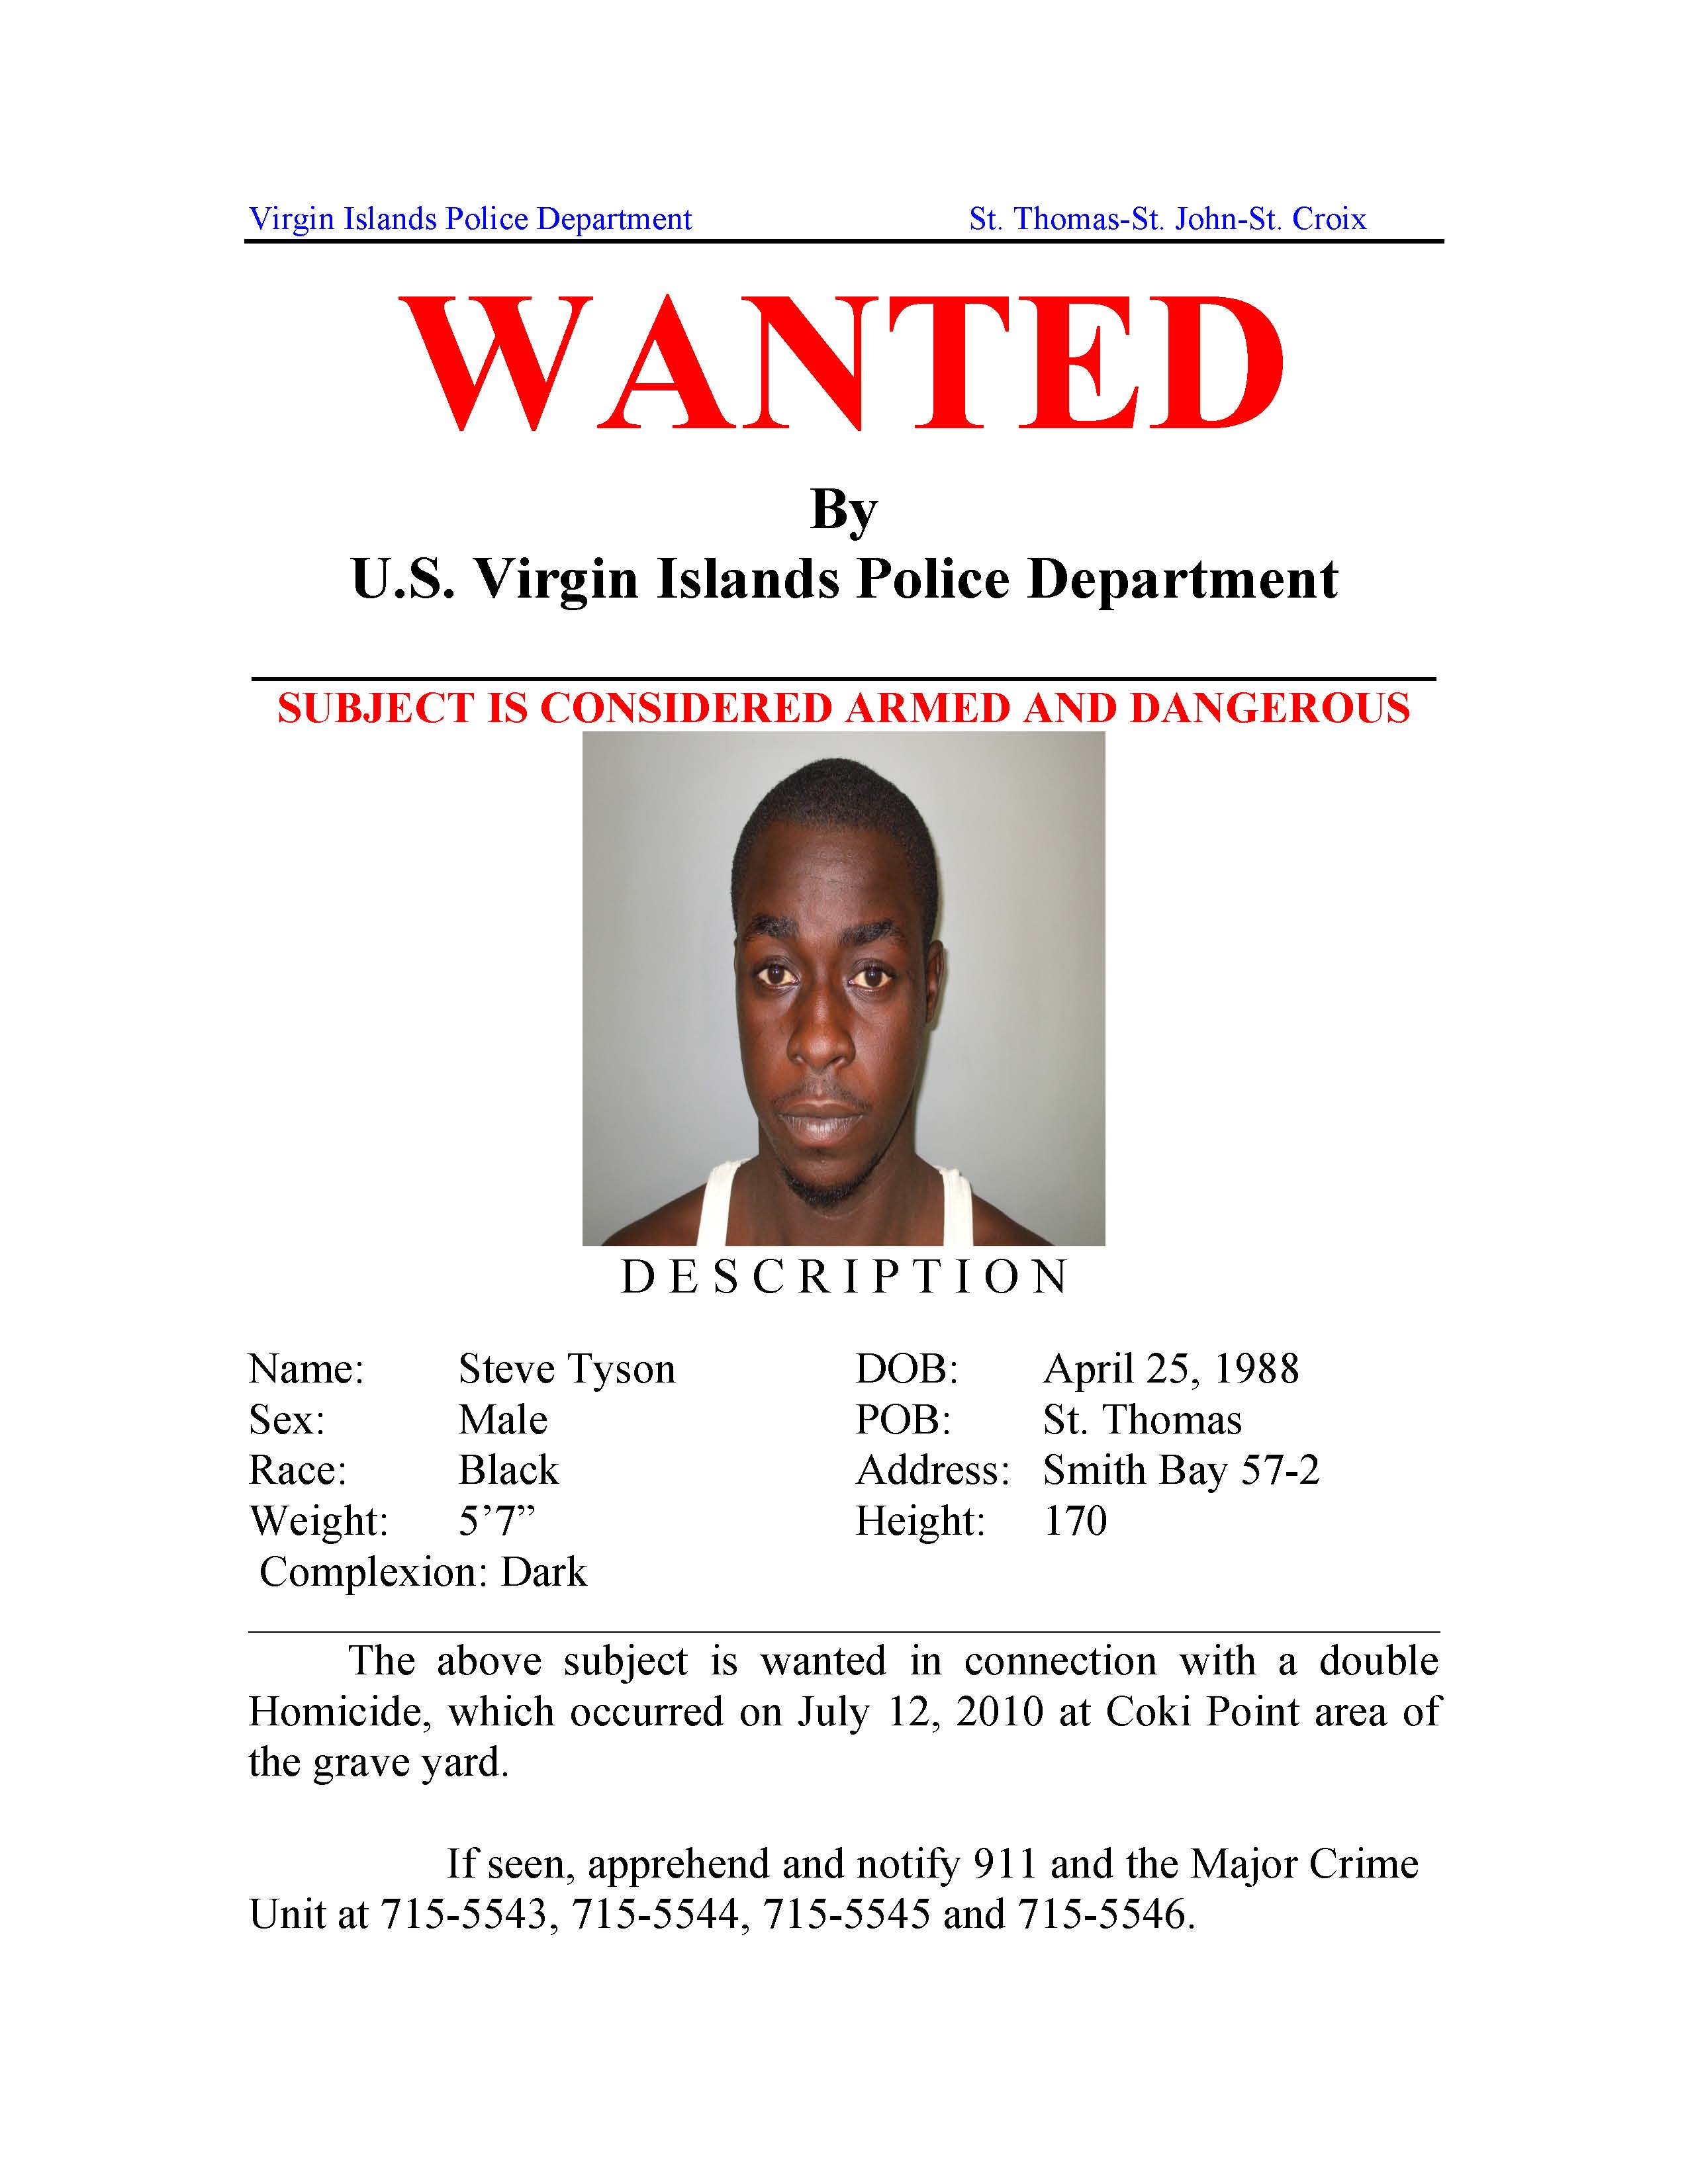 Police Issue Wanted Poster for Double Homicide Suspect